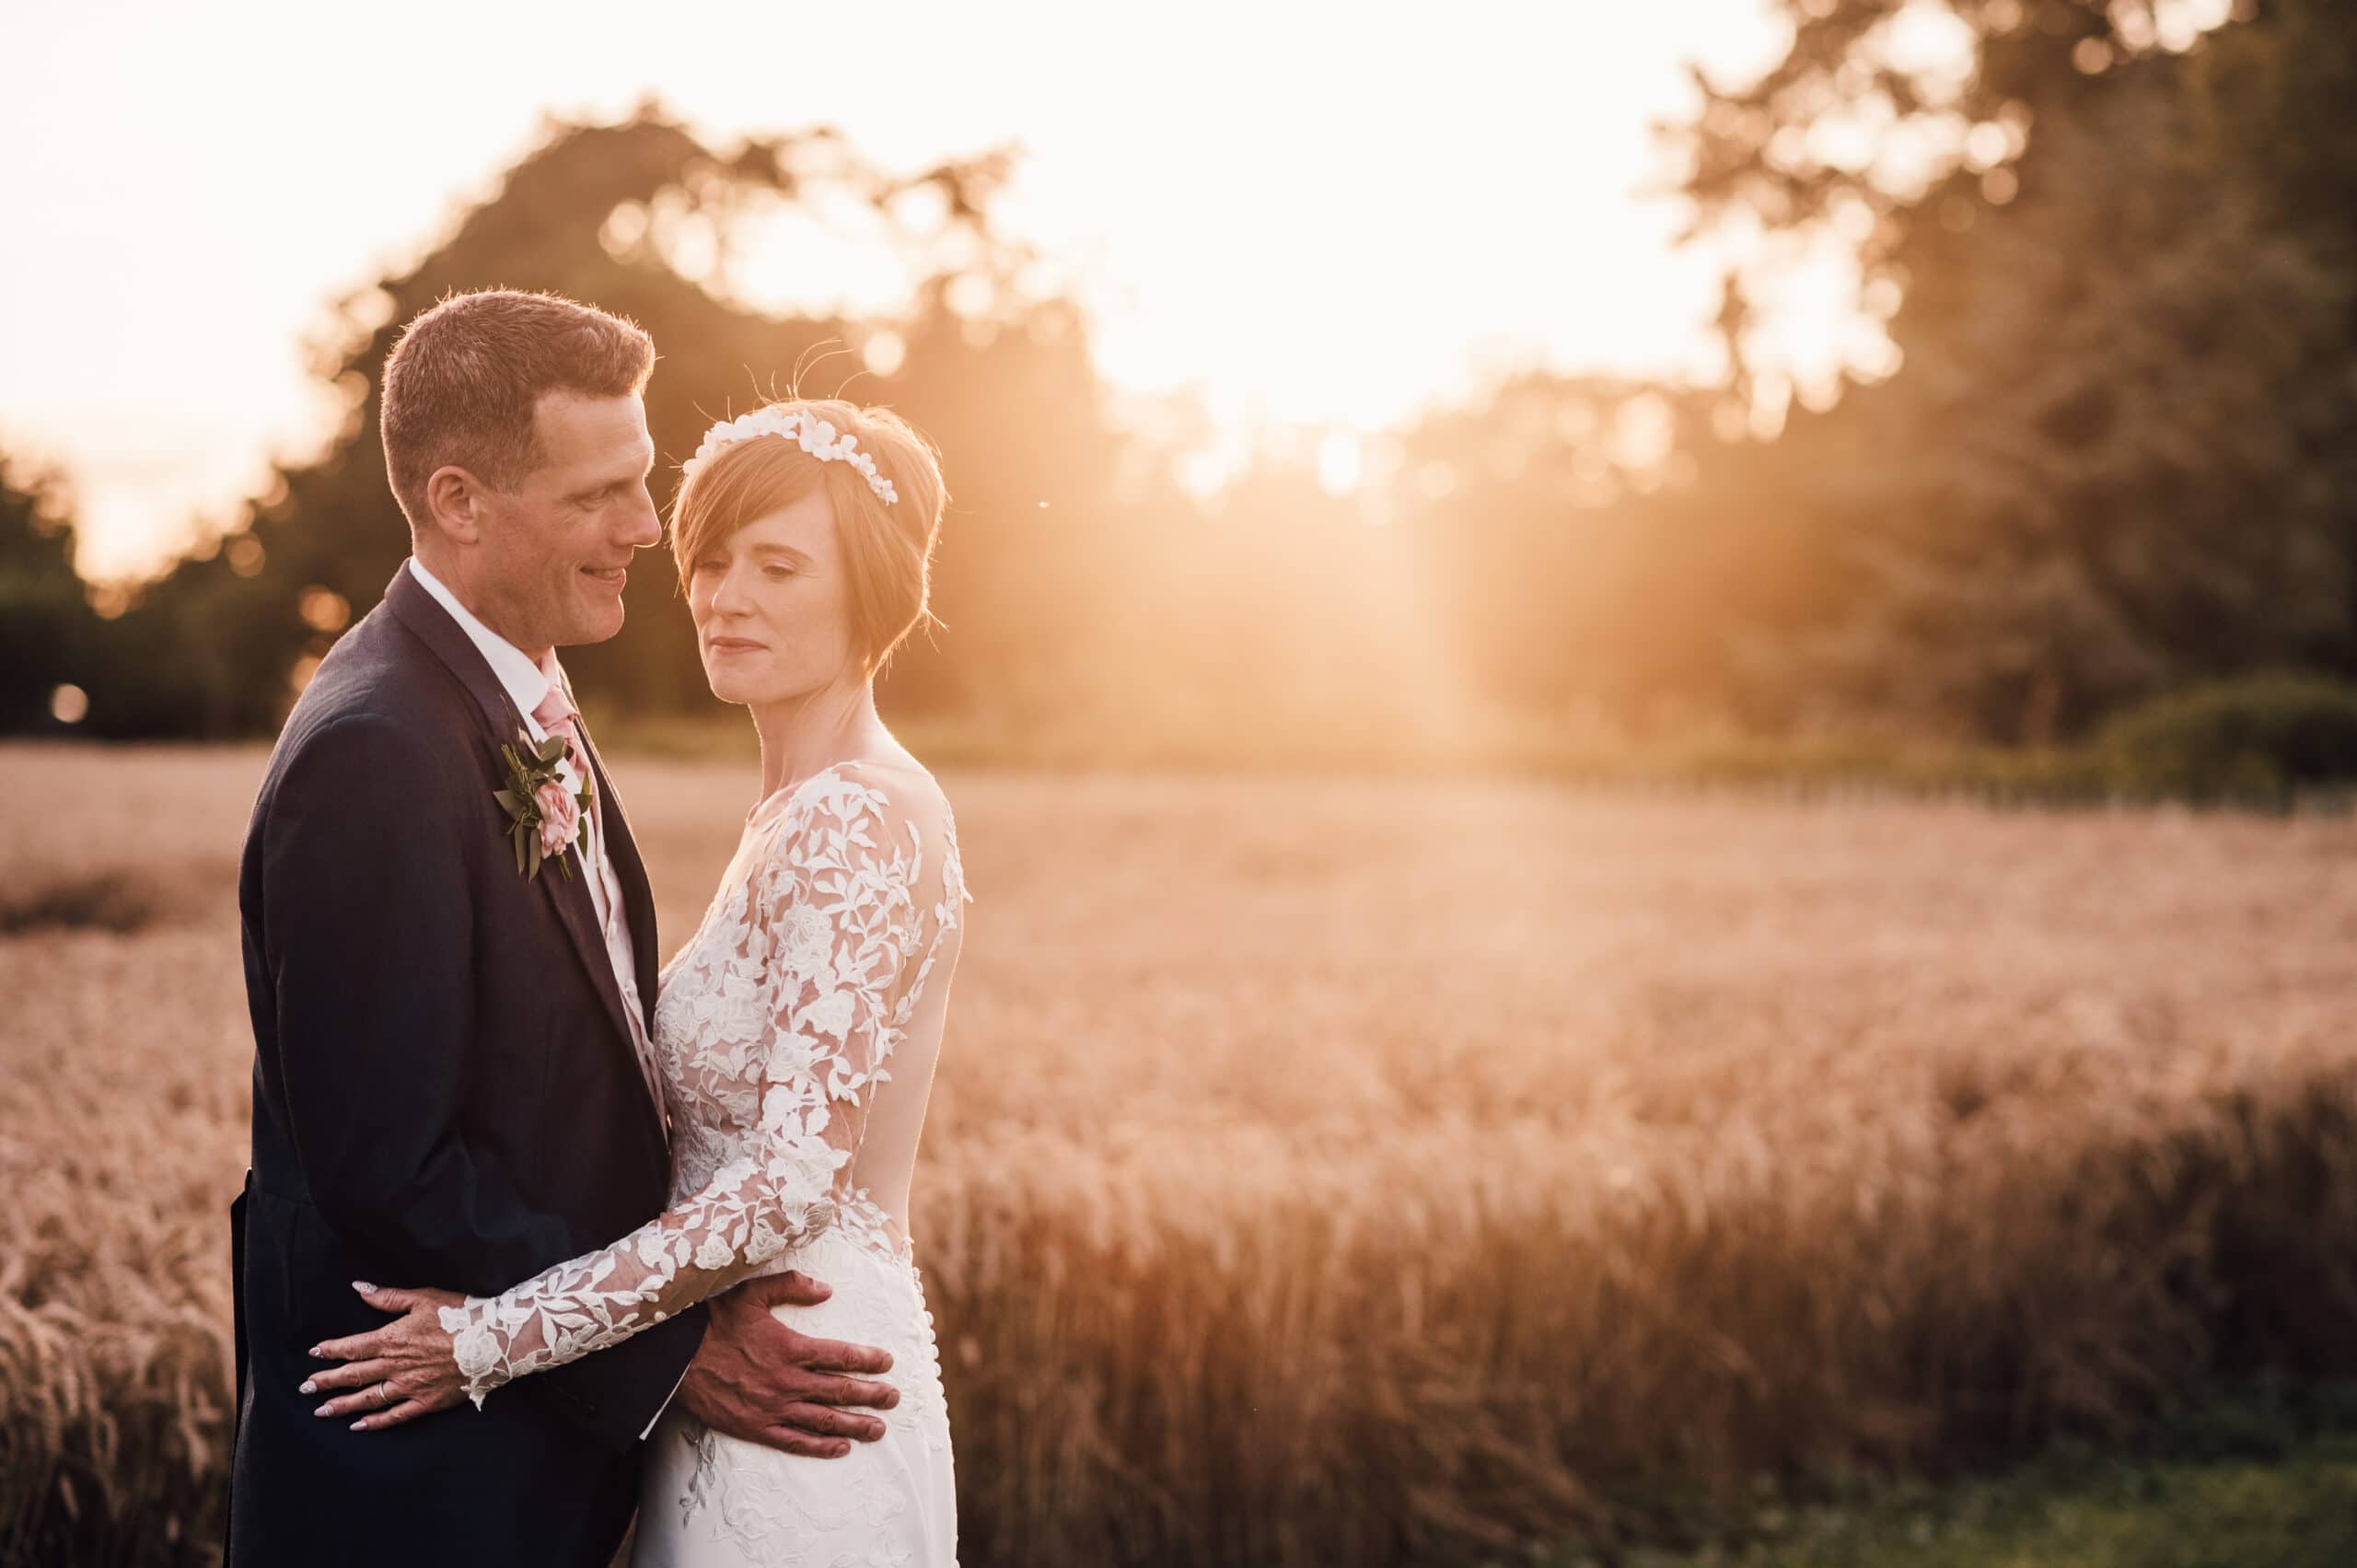 Bride and Groom enjoying the grounds during golden hour at their Bassmead Manor Barns Wedding.